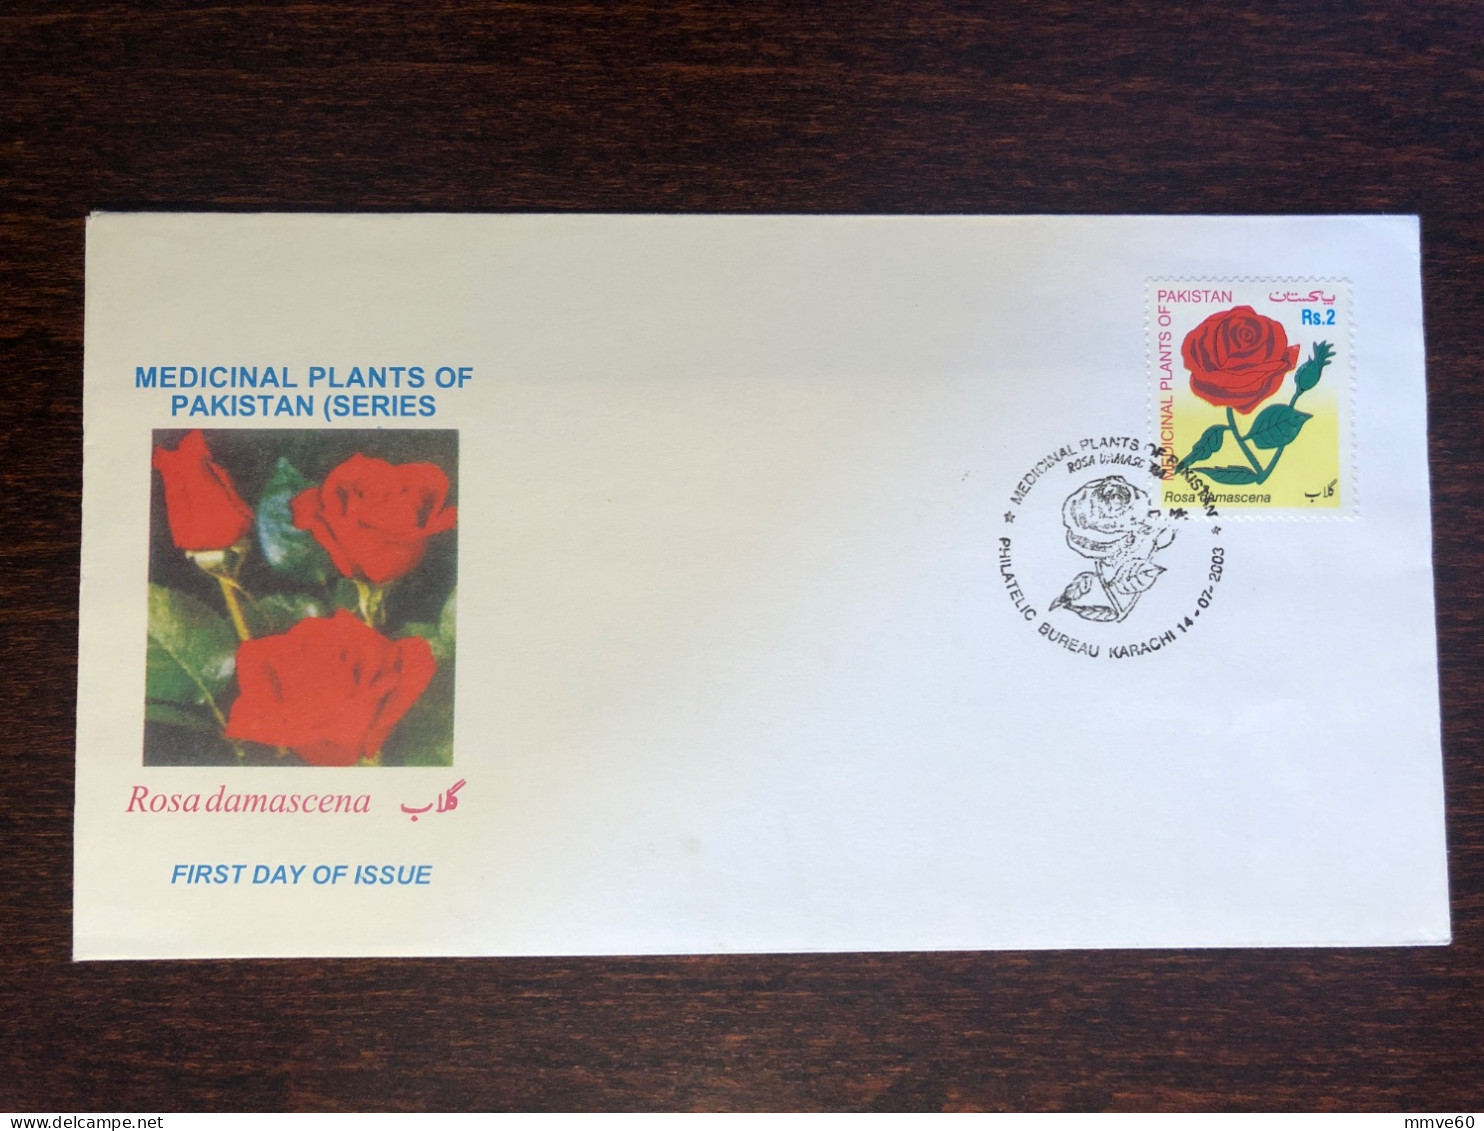 PAKISTAN FDC COVER 2003 YEAR MEDICINAL PLANTS HEALTH MEDICINE STAMPS - Pakistan